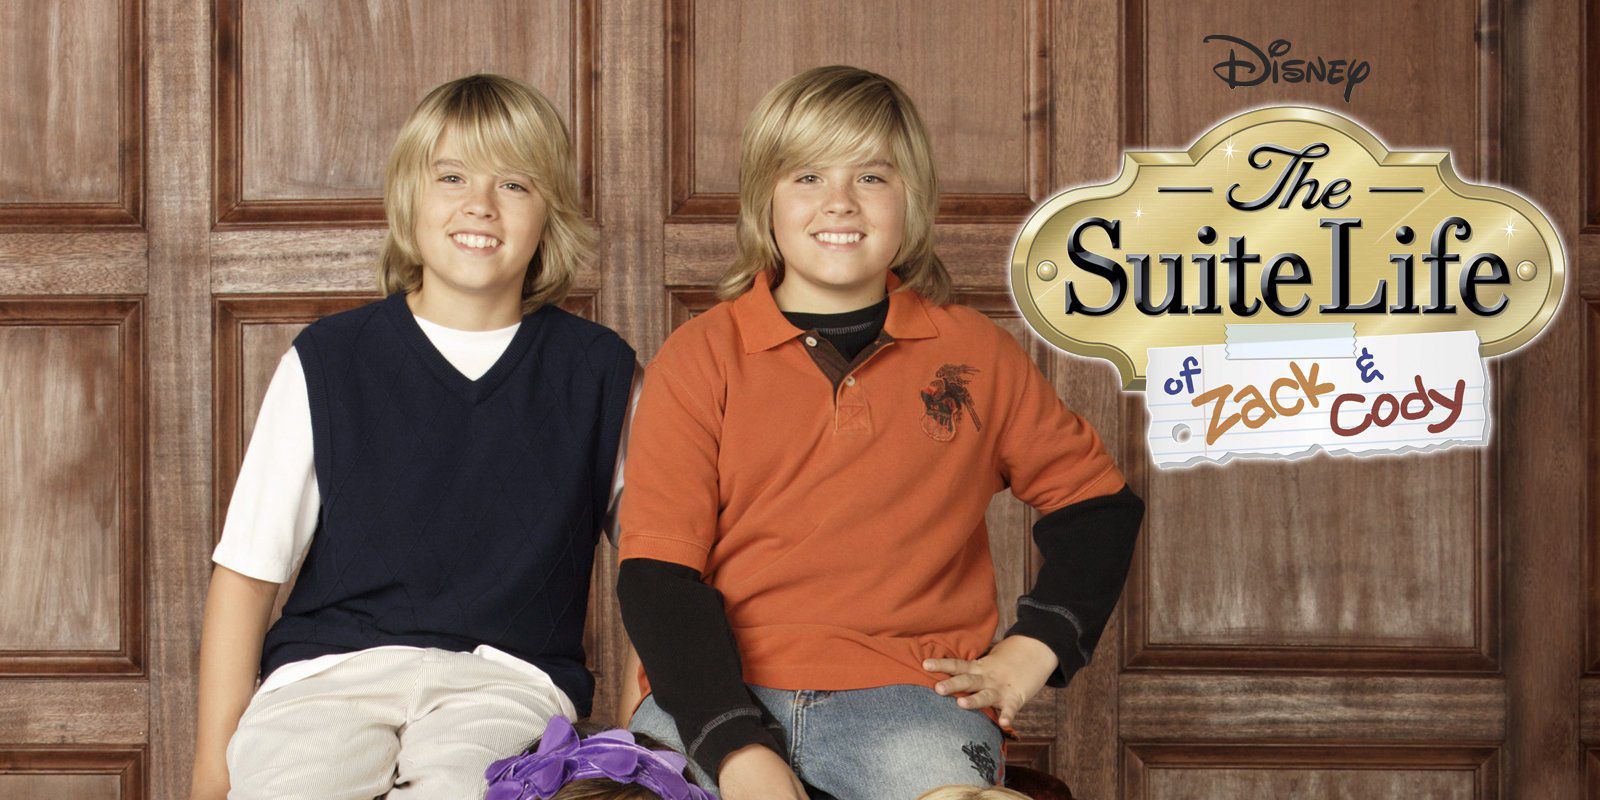 10. The Suite Life of Zack and Cody - 6.4. 